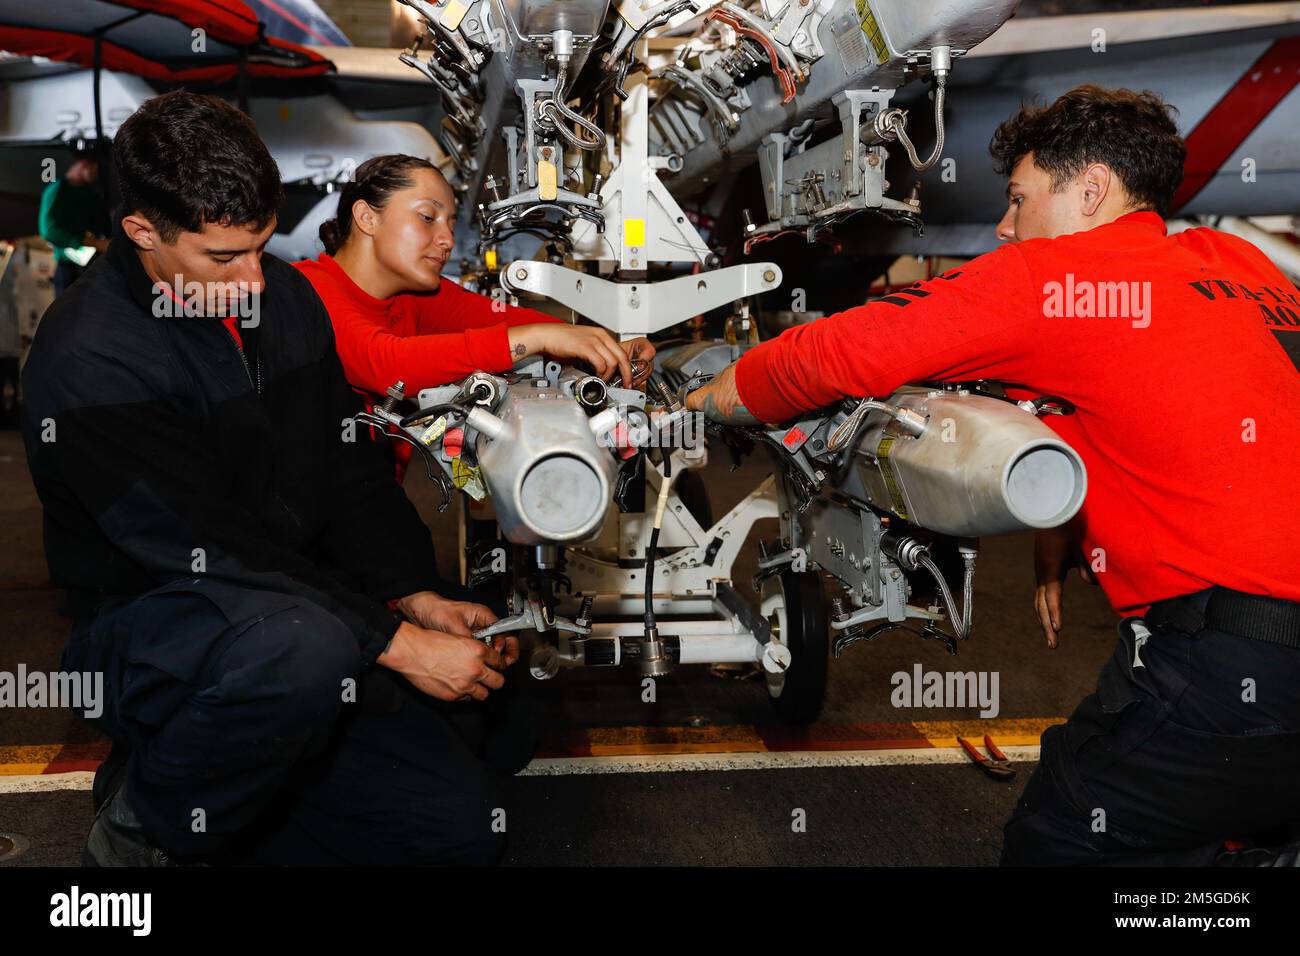 PHILIPPINE SEA (March 17, 2022) Sailors, assigned to the “Vigilantes” of Strike Fighter Squadron (VFA) 151, conduct maintenance on an improved multiple ejection rack (IMER) in the hangar bay aboard the Nimitz-class aircraft carrier USS Abraham Lincoln (CVN 72). Abraham Lincoln Strike Group is on a scheduled deployment in the U.S. 7th Fleet area of operations to enhance interoperability through alliances and partnerships while serving as a ready-response force in support of a free and open Indo-Pacific region. Stock Photo